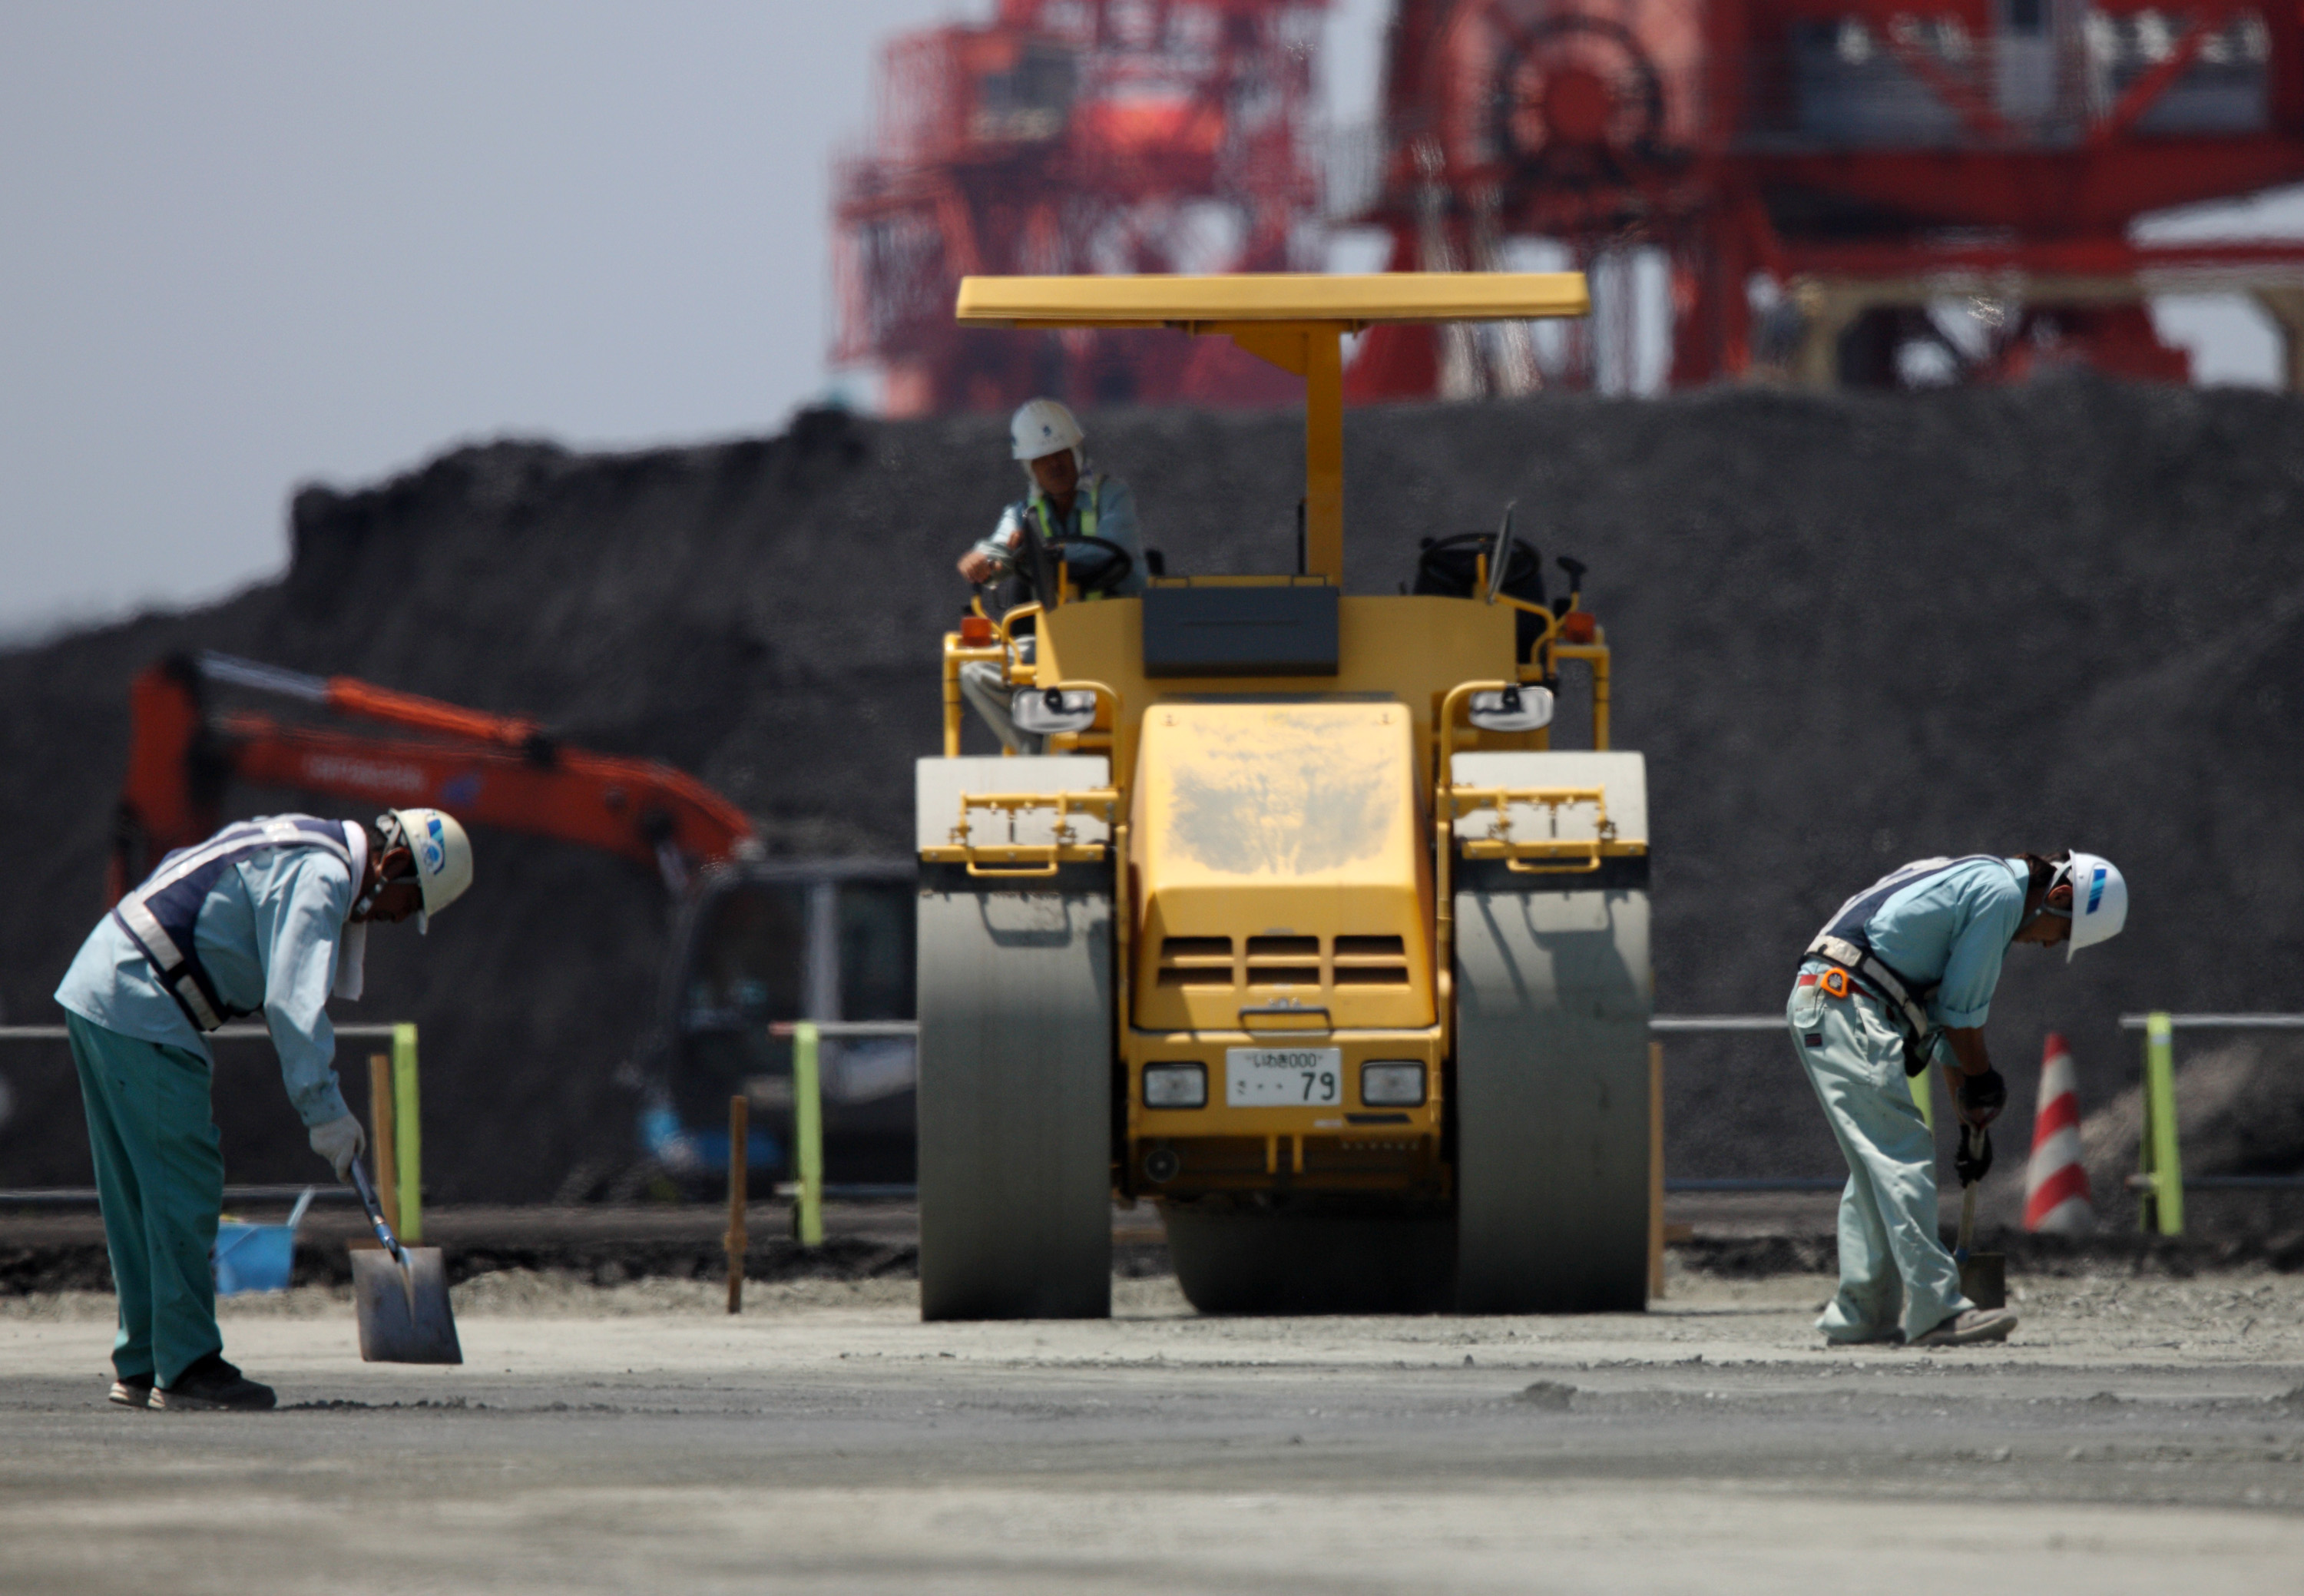 Workers repair a coal loading facility at Onahama port in Iwaki, Fukushima Prefecture. Japan's government and industry are backing emerging coal technologies that they say are less damaging to the environment. | BLOOMBERG